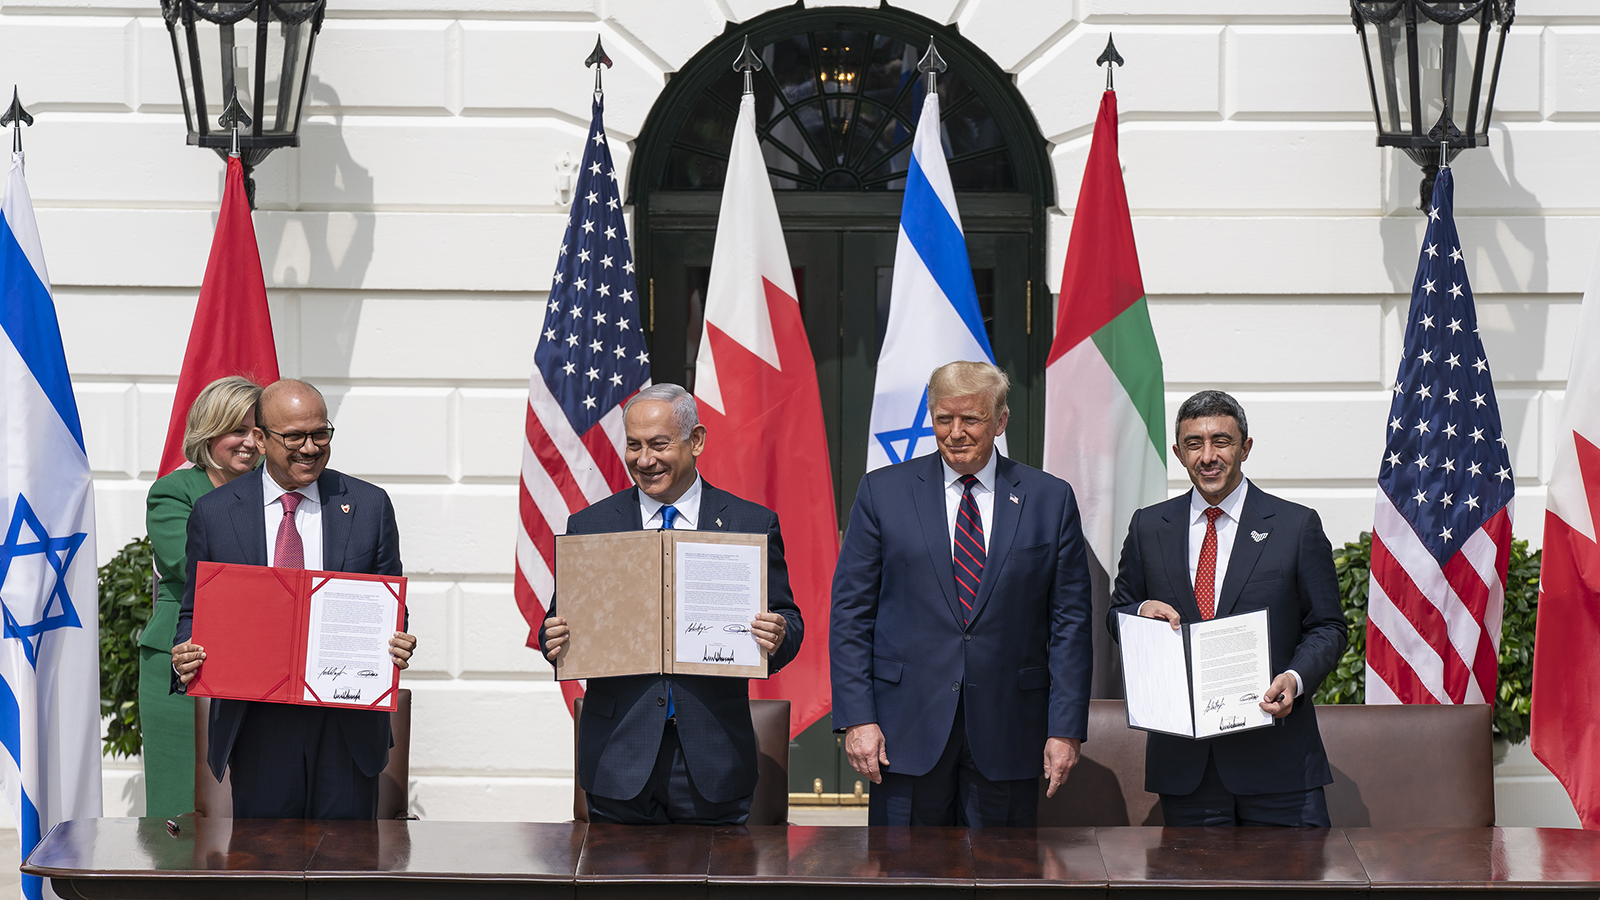 Minister of Foreign Affairs of Bahrain Dr. Abdullatif bin Rashid Al-Zayani, from left, Israeli Prime Minister Benjamin Netanyahu, U.S. President Donald Trump and Minister of Foreign Affairs for the United Arab Emirates Abdullah bin Zayed Al Nahyan display signatures after signing the Abraham Accords, Tuesday, Sept. 15, 2020, on the South Lawn of the White House. (Official White House Photo by Shealah Craighead/Creative Commons)